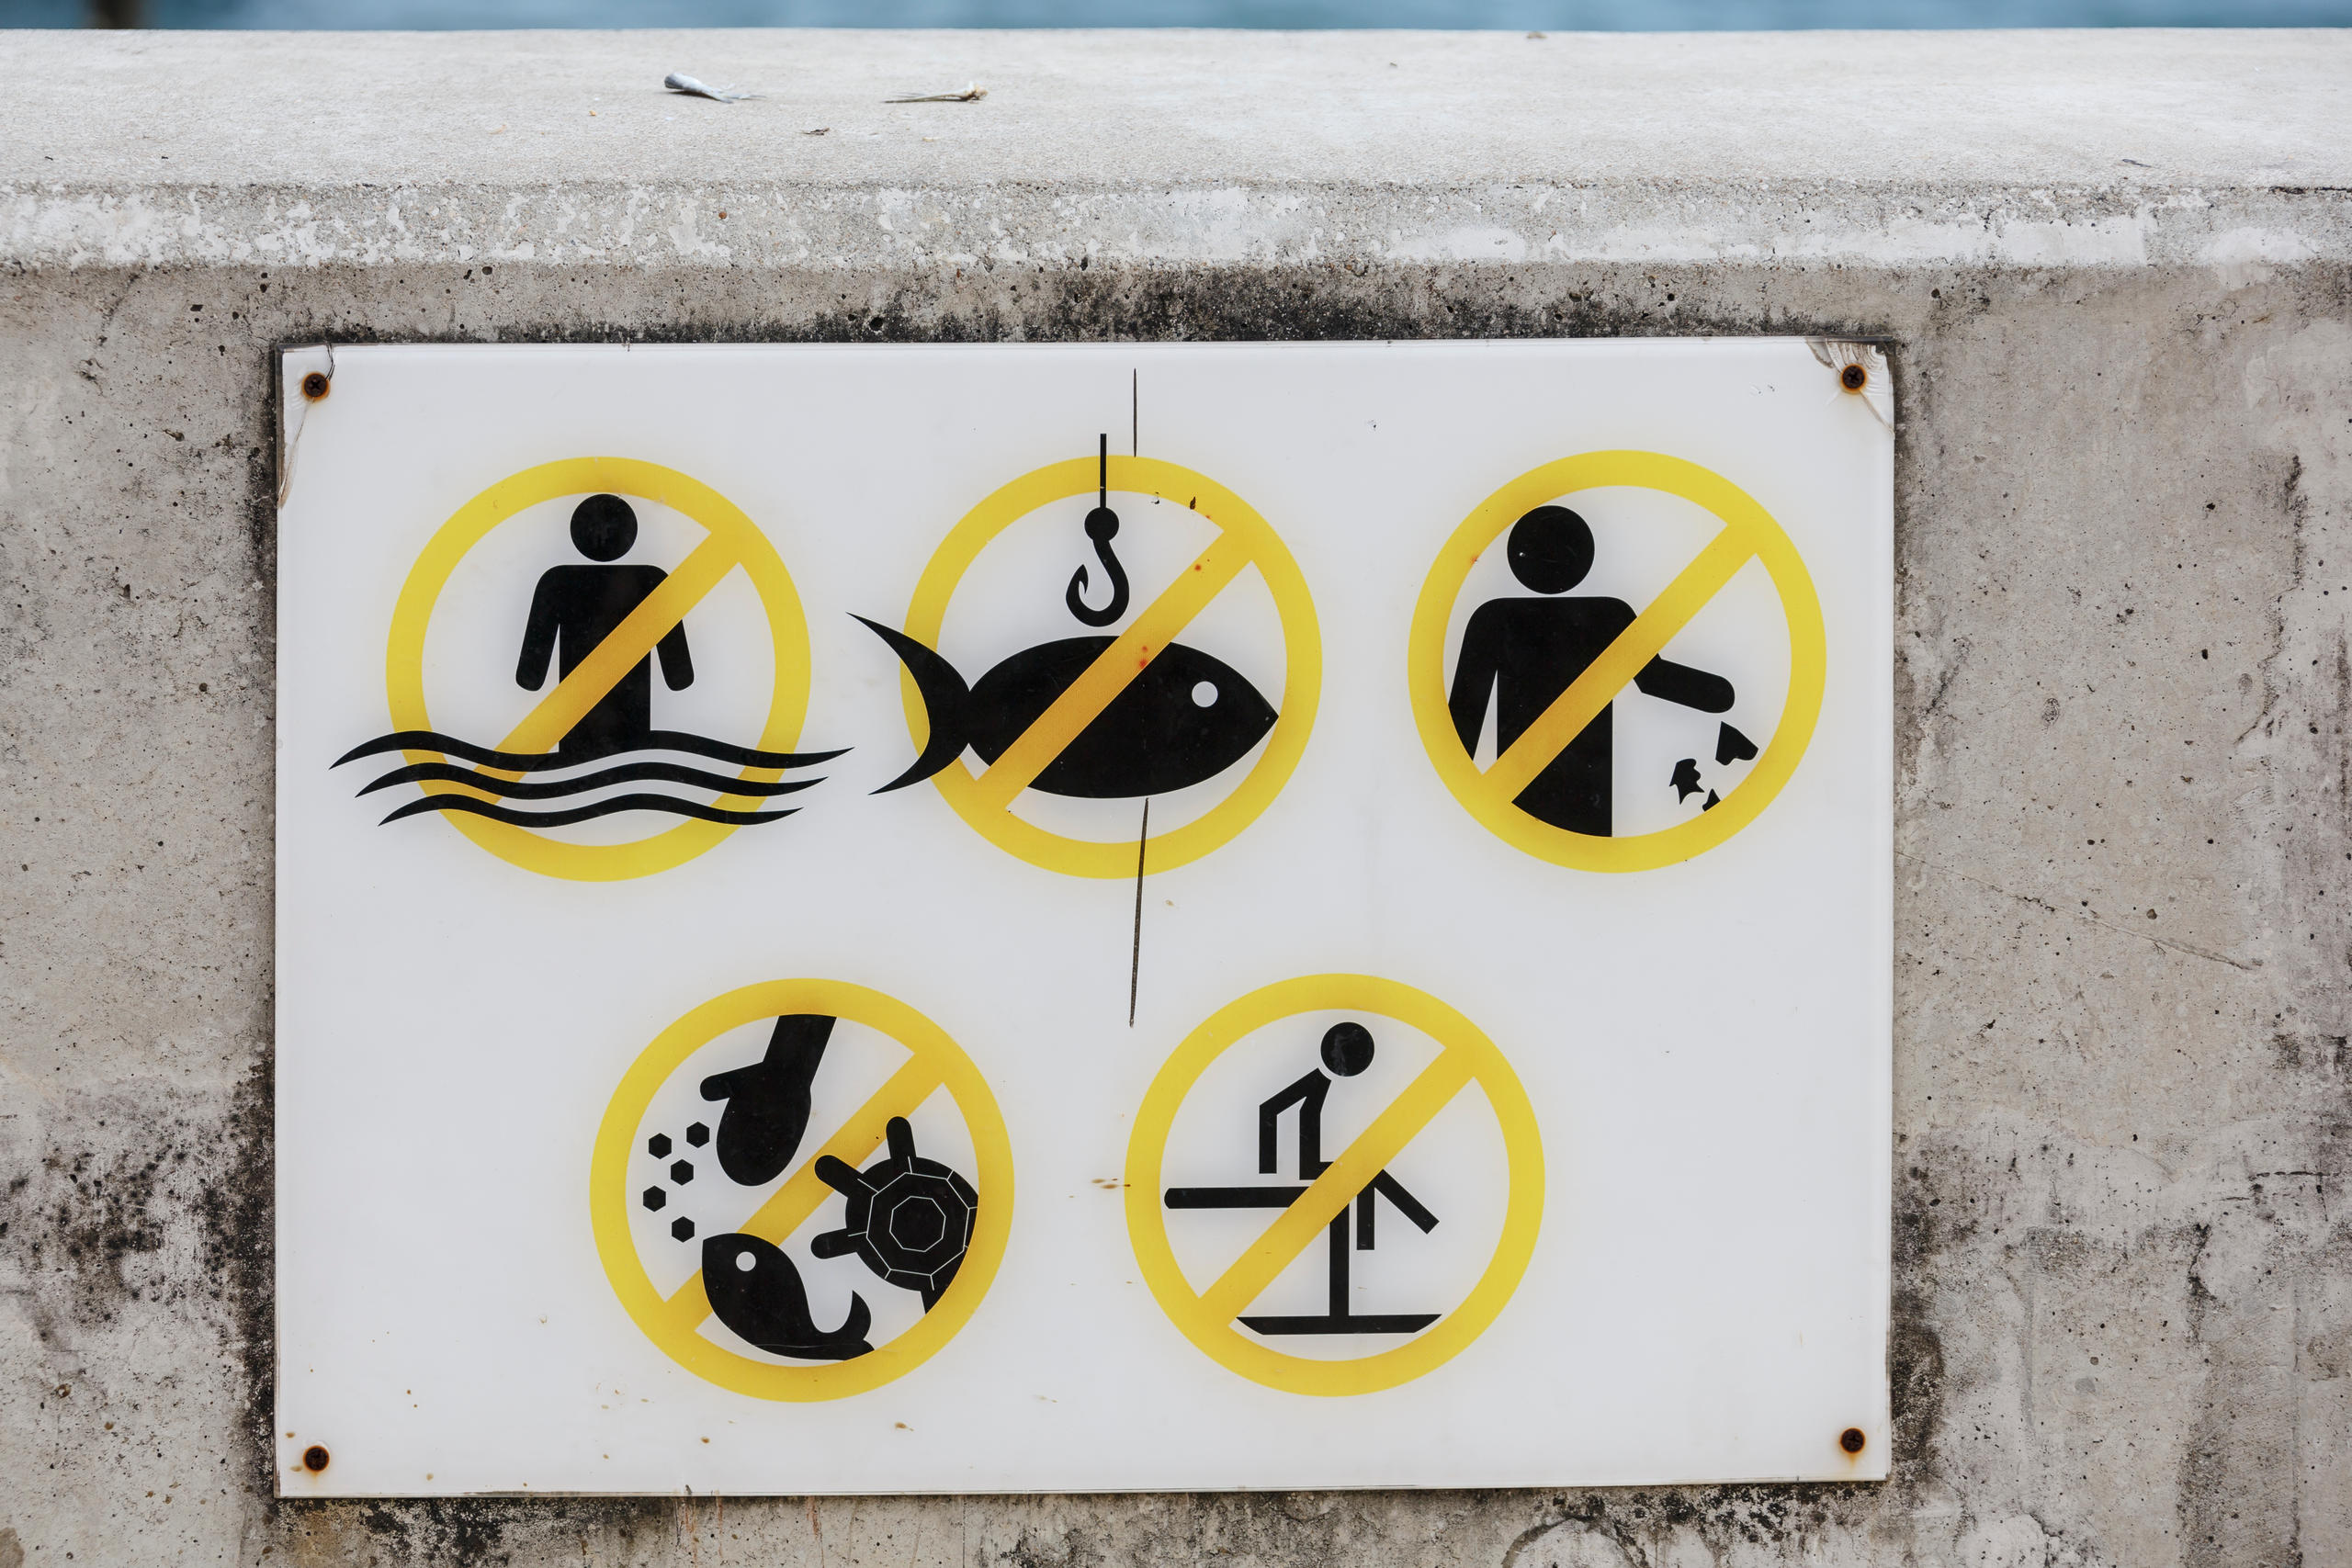 Five prohibition signs in Singapore